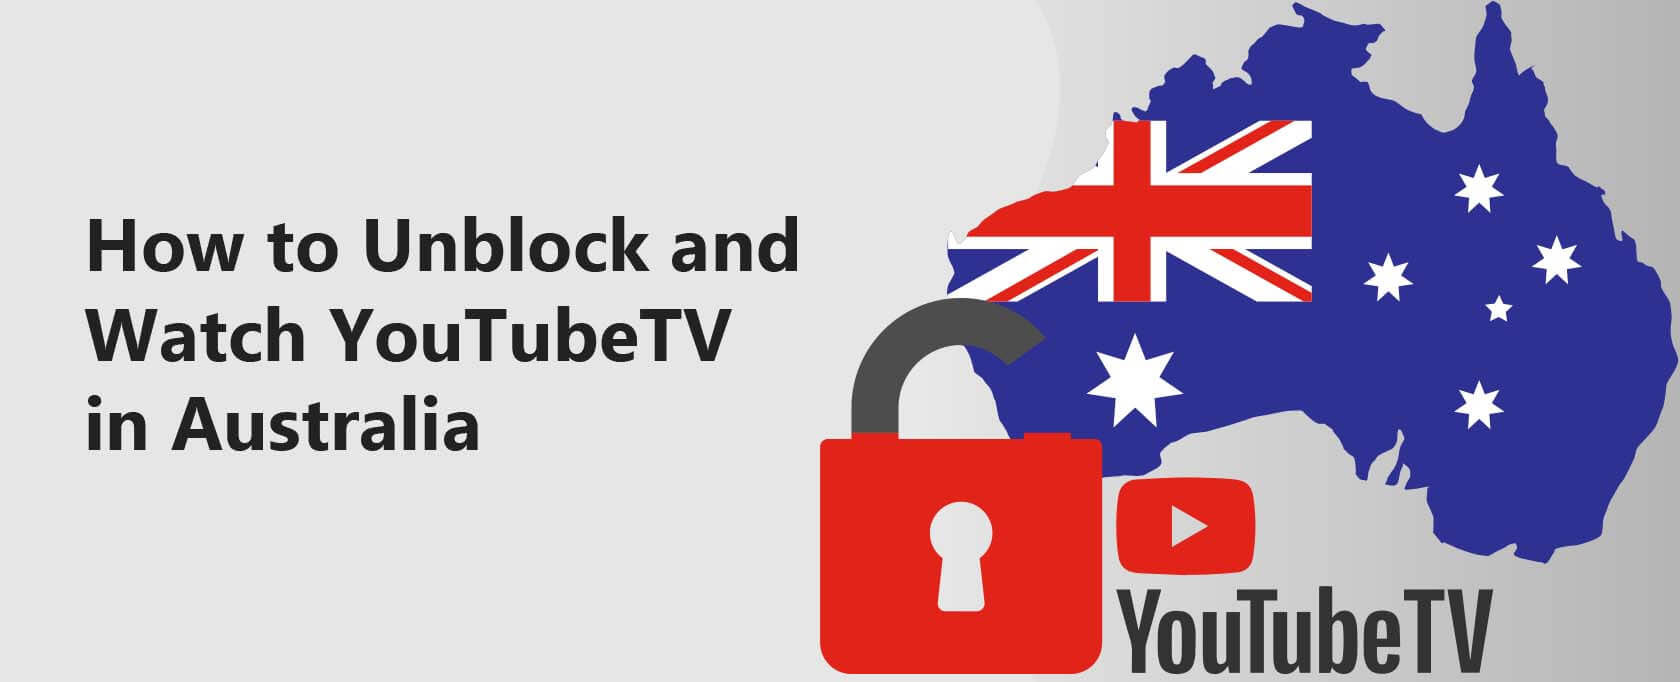 How to Unblock and Watch YouTube TV in Australia